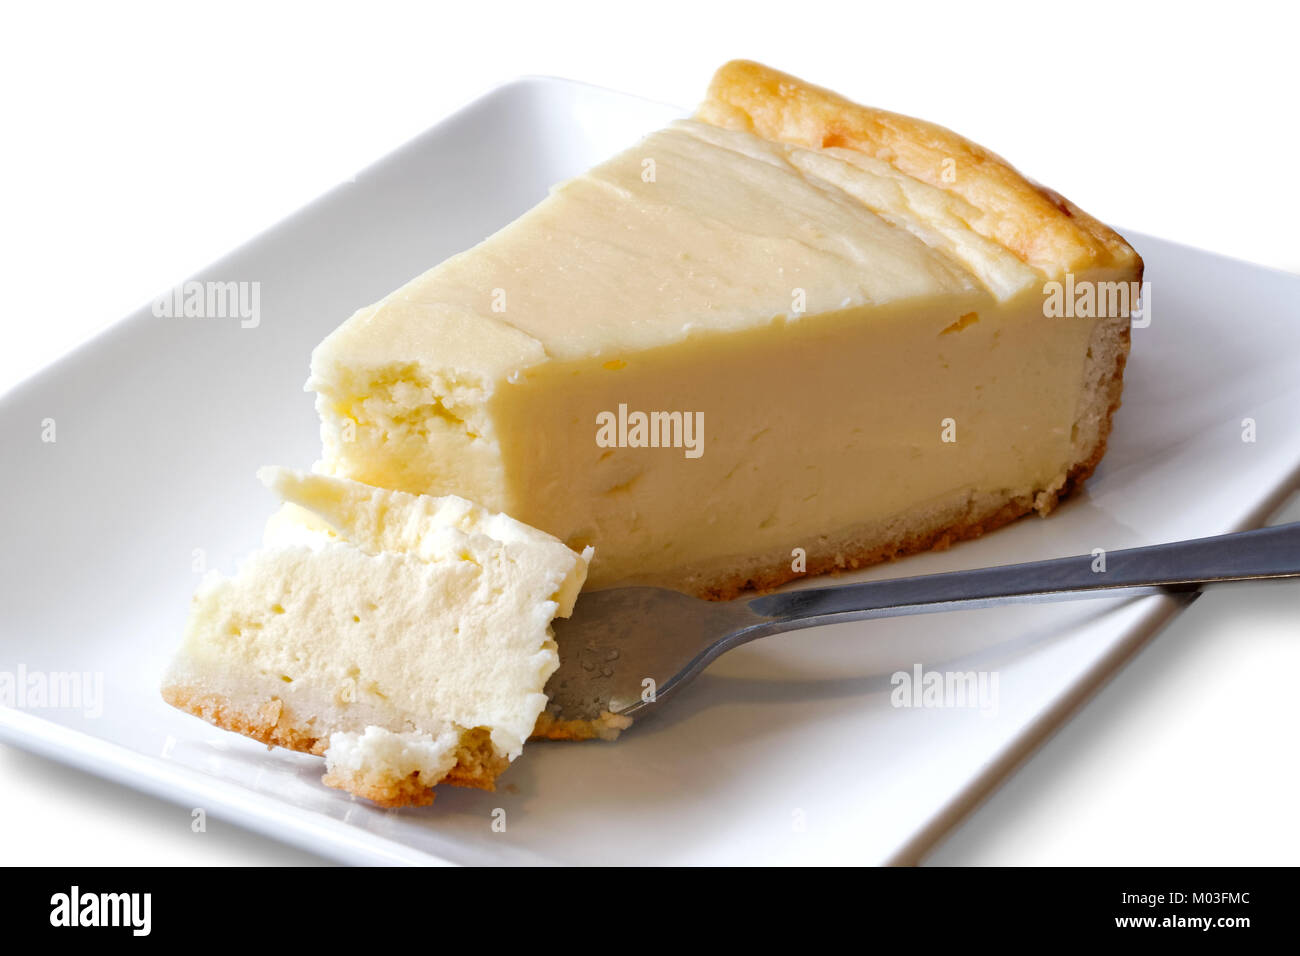 Plain baked cheesecake with cake on fork on white ceramic plate. White background. Stock Photo